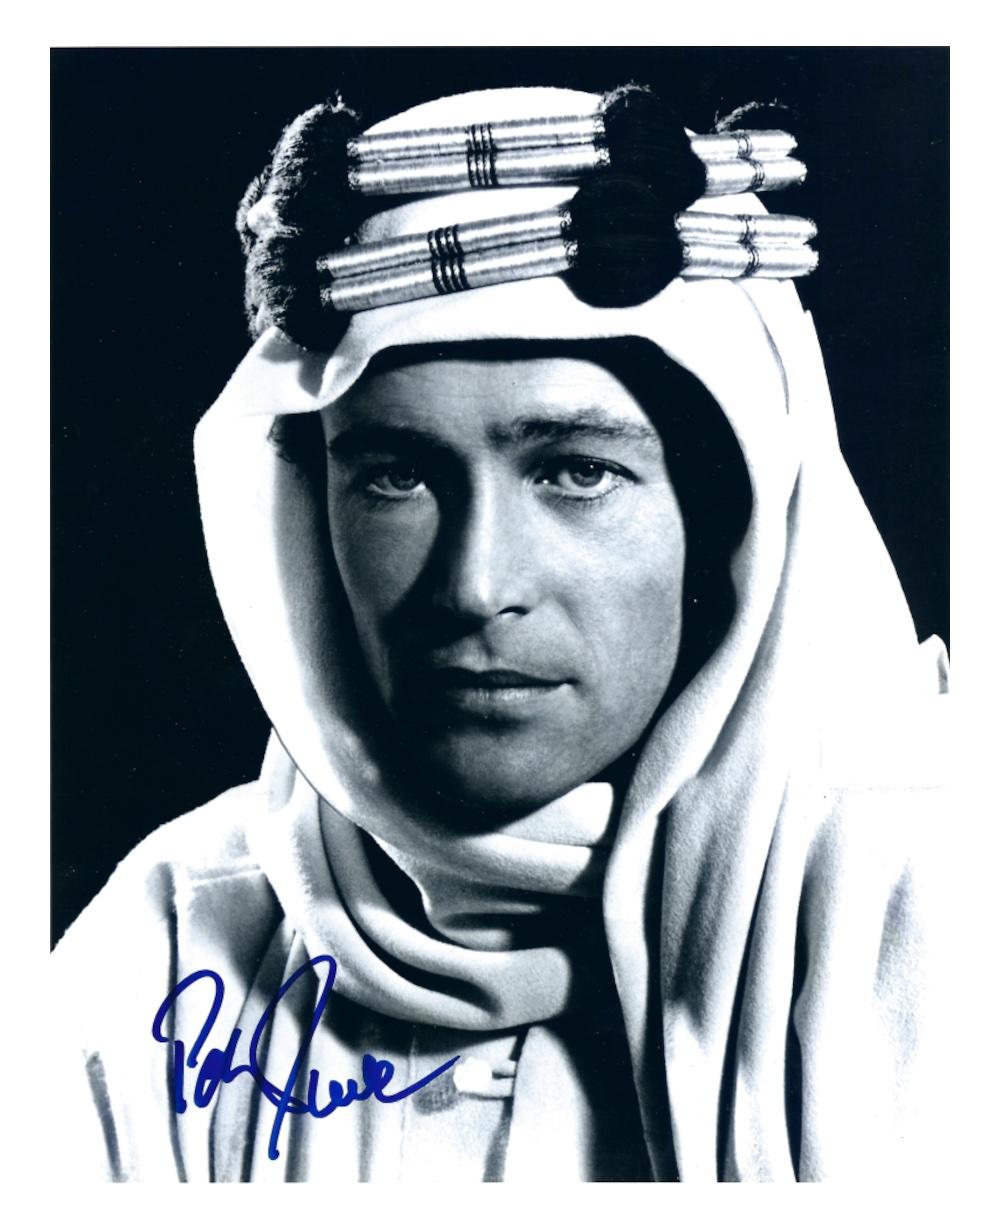 A stunning signed photograph of Peter O'Toole as Lawrence of Arabia
Peter O'Toole (1932 - 2013) was one of the most acclaimed British actors of his generation
A star of stage and screen, O'Toole was nominated for a record seven Best Actor Academy